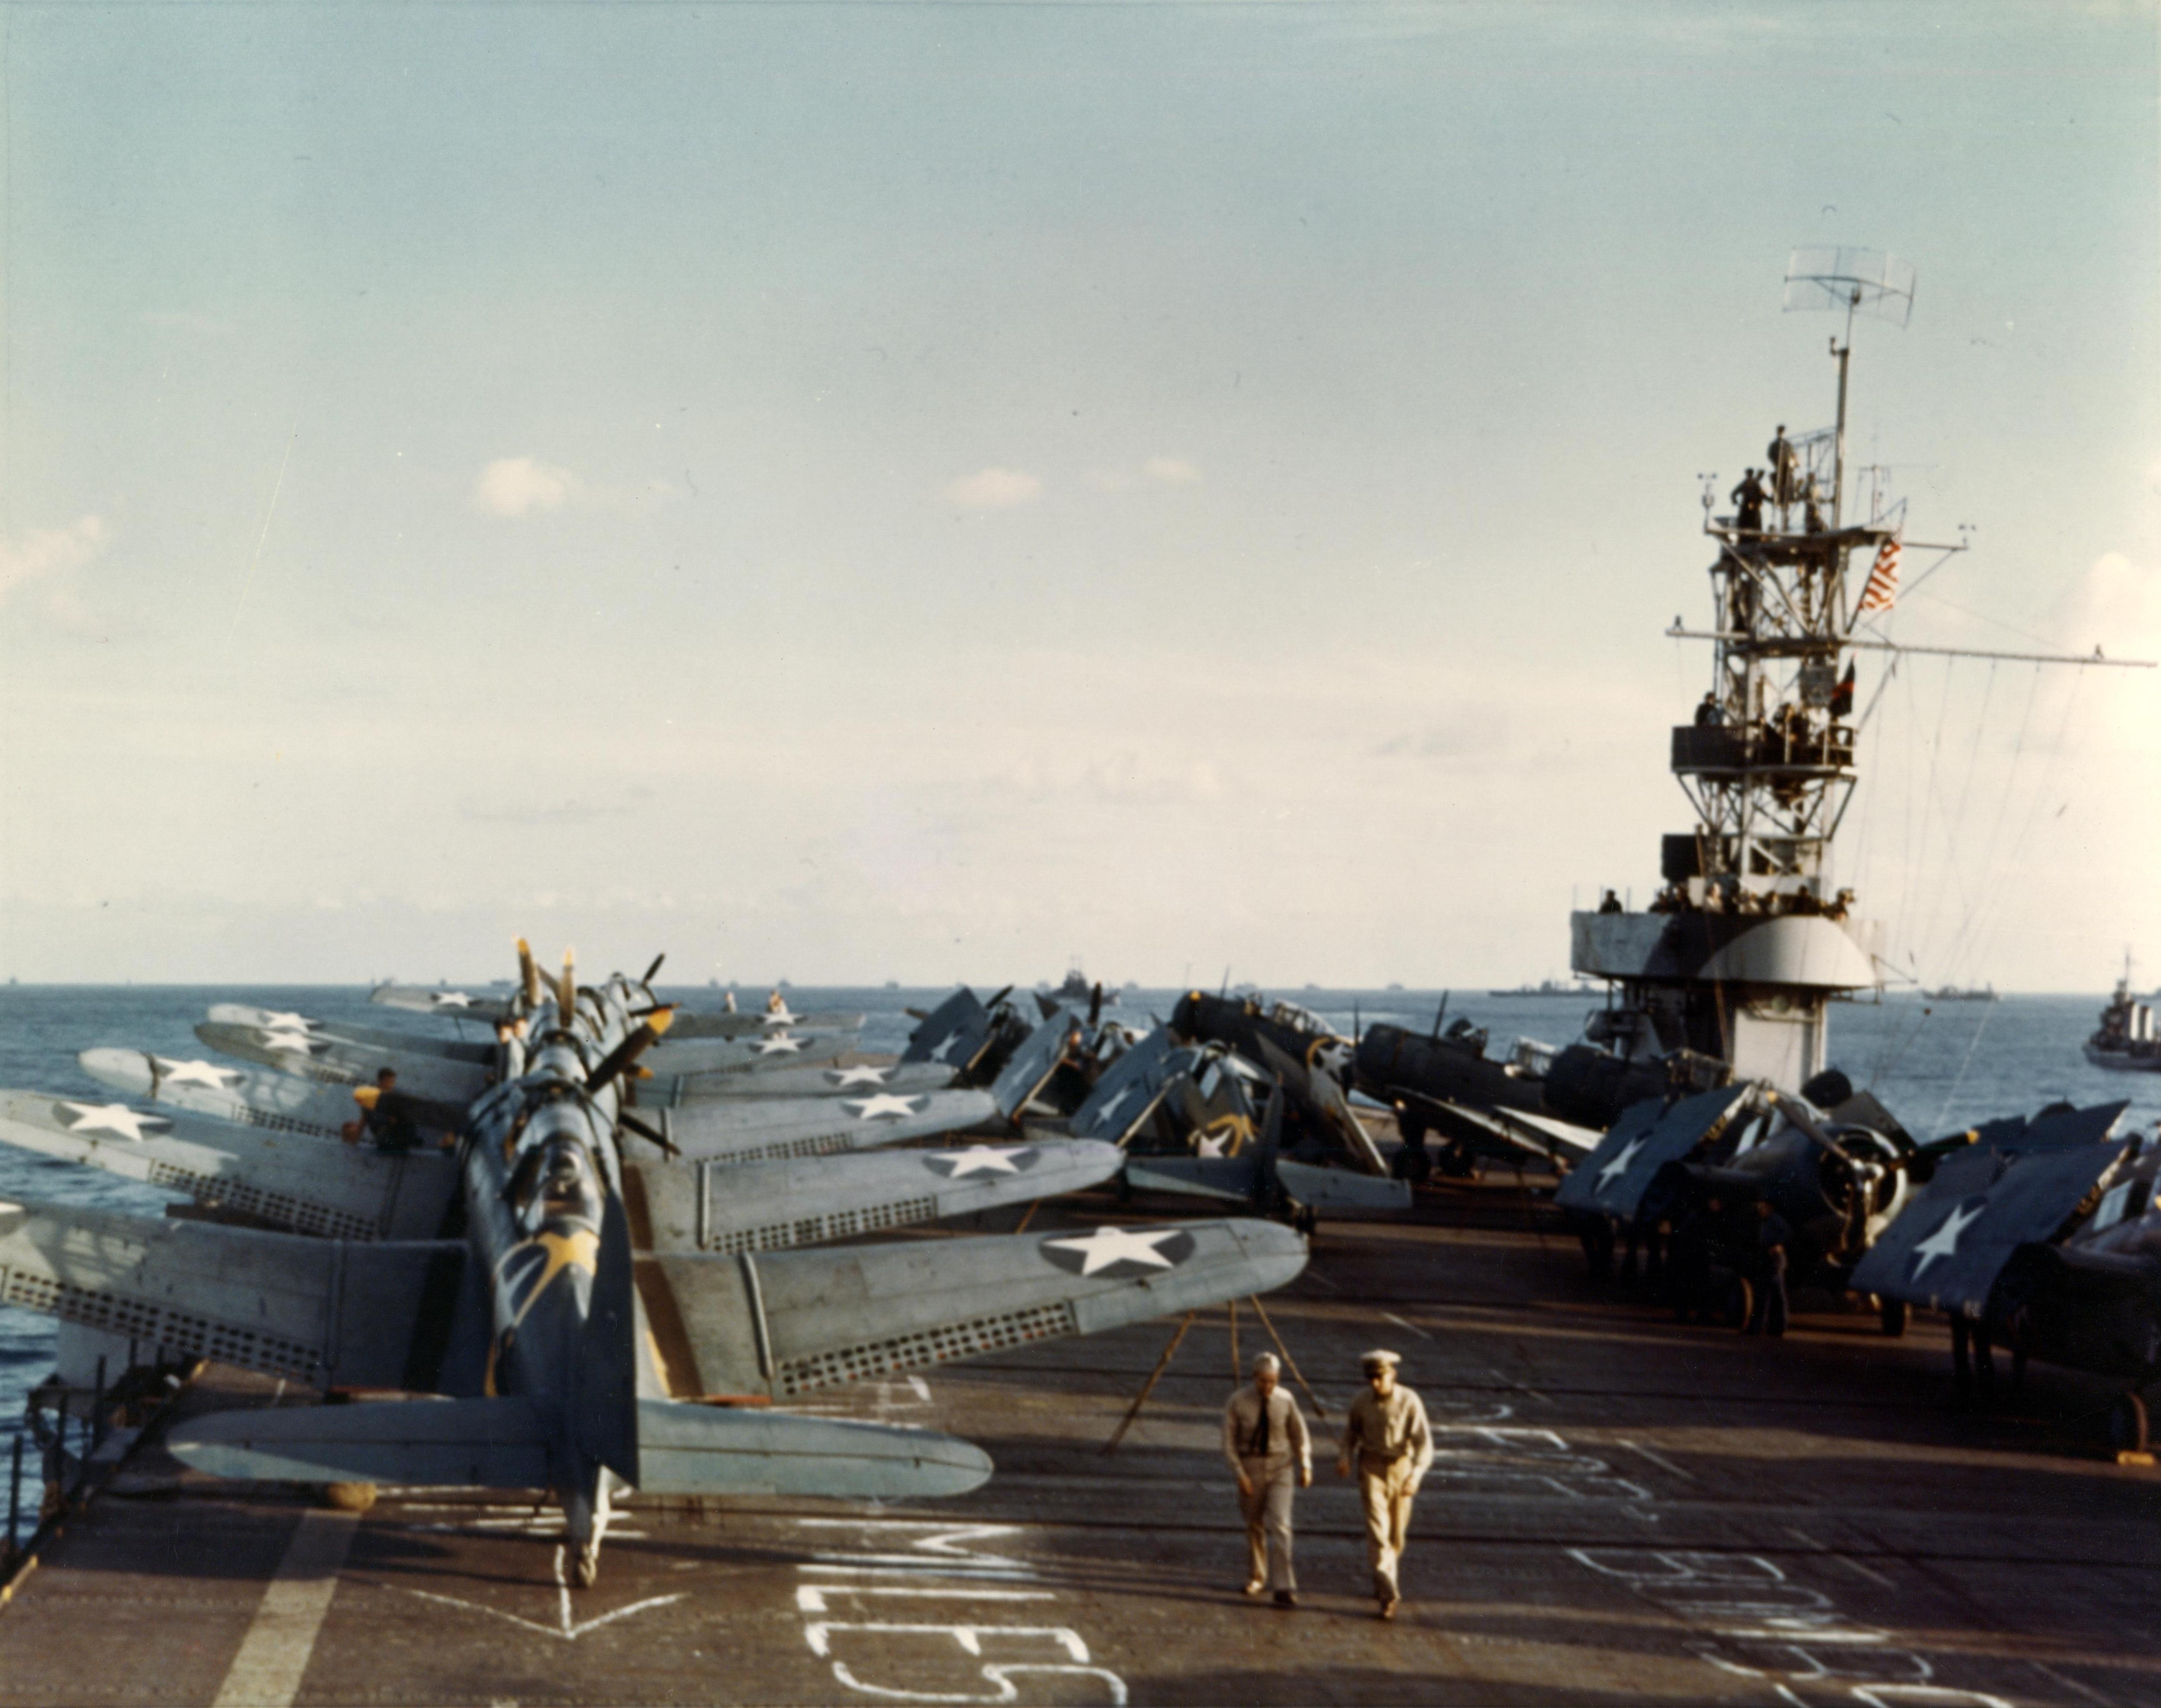 Flight deck of the USS Santee filled with SBD-3 Dauntless scout-bombers and F4F-4 Wildcat fighters bound for Operation Torch in North Africa, Nov 1942. Note target and distance information chalked on the flight deck.